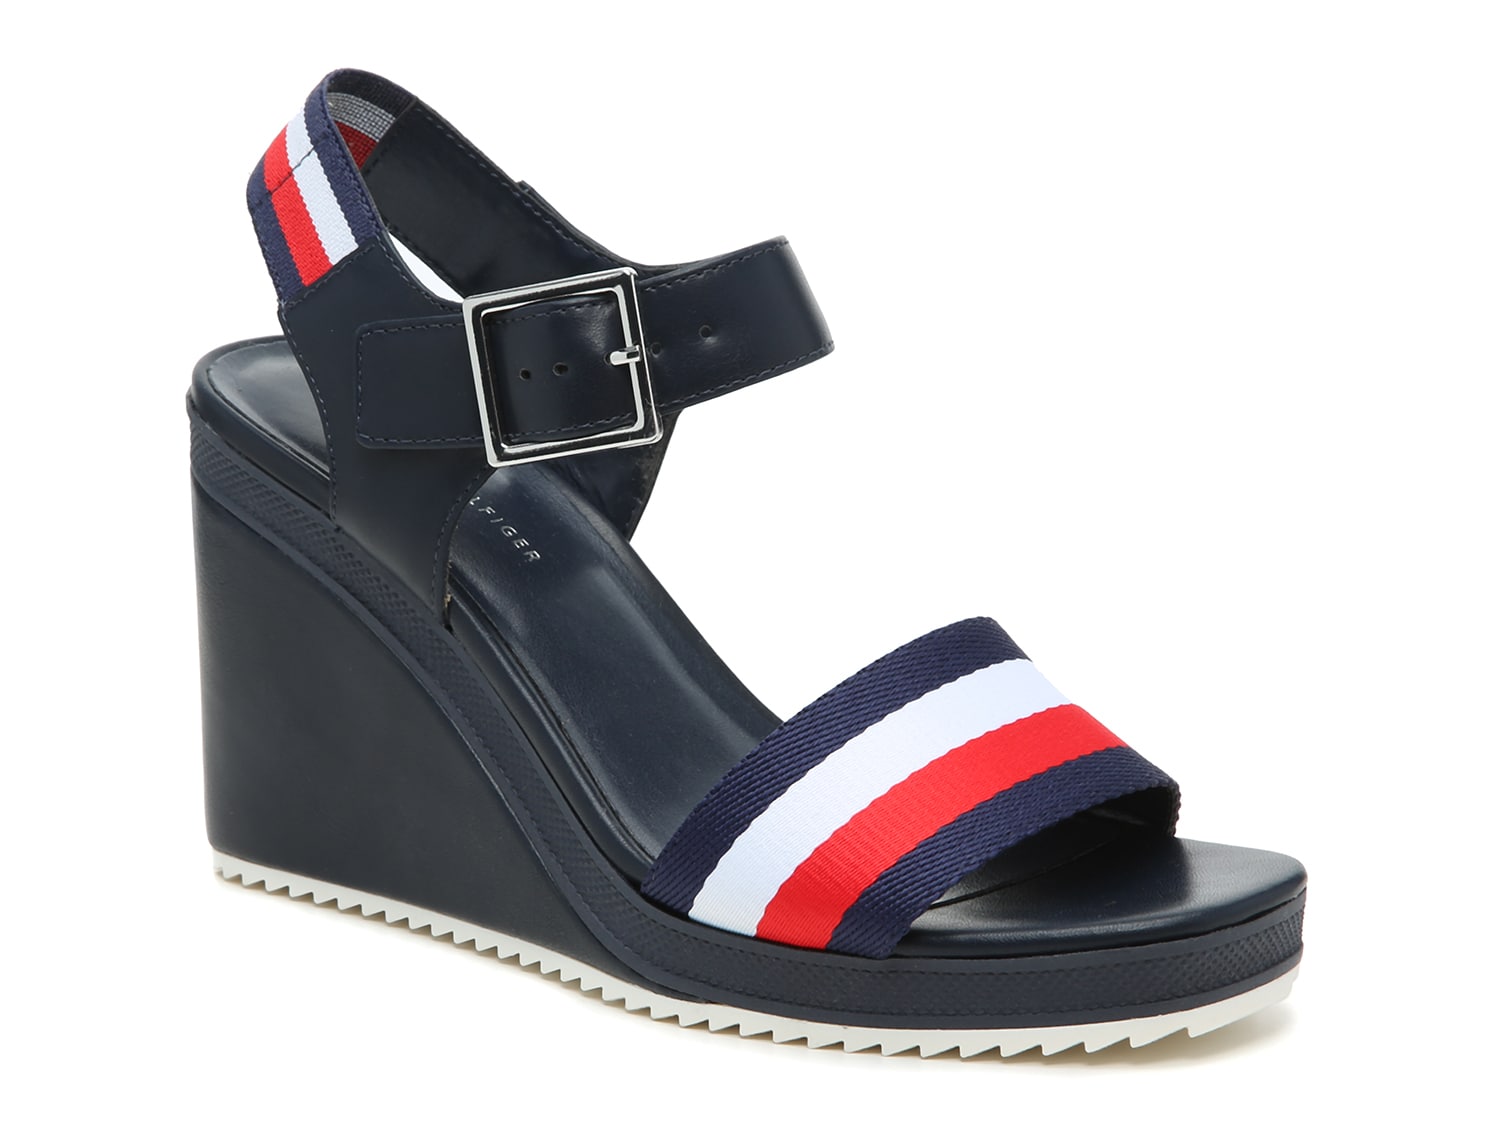 tommy hilfiger women's wedge shoes